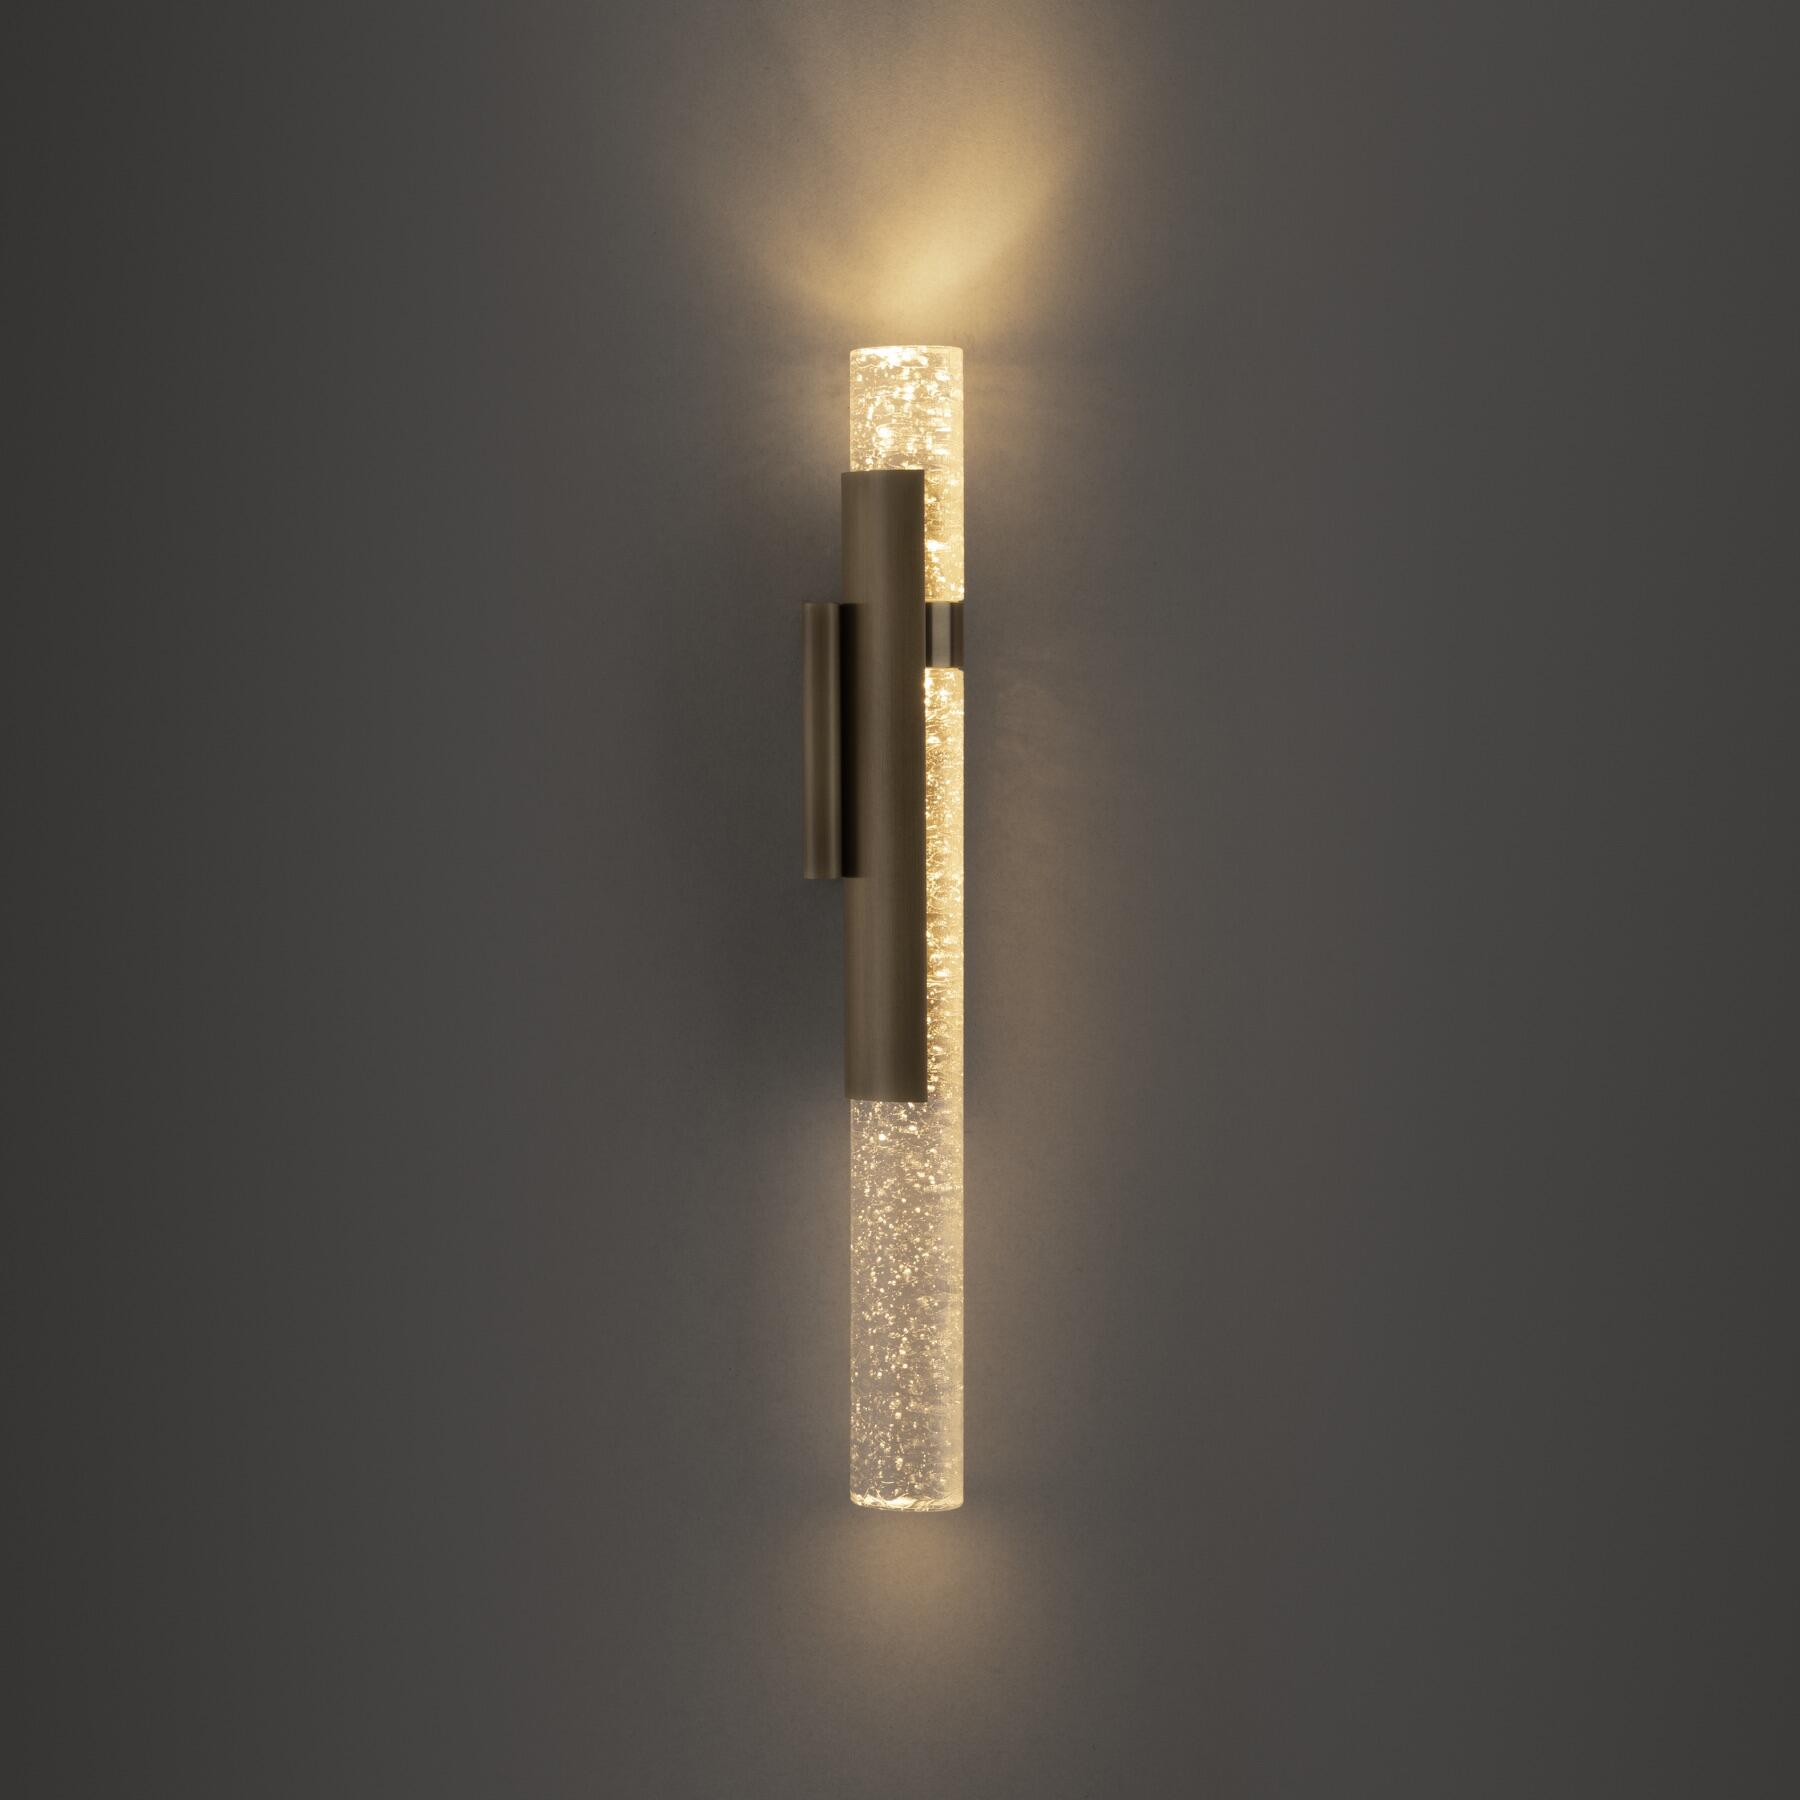 Monument Sconce, Left Facing, 22.75 in, Golden Bronze Patina